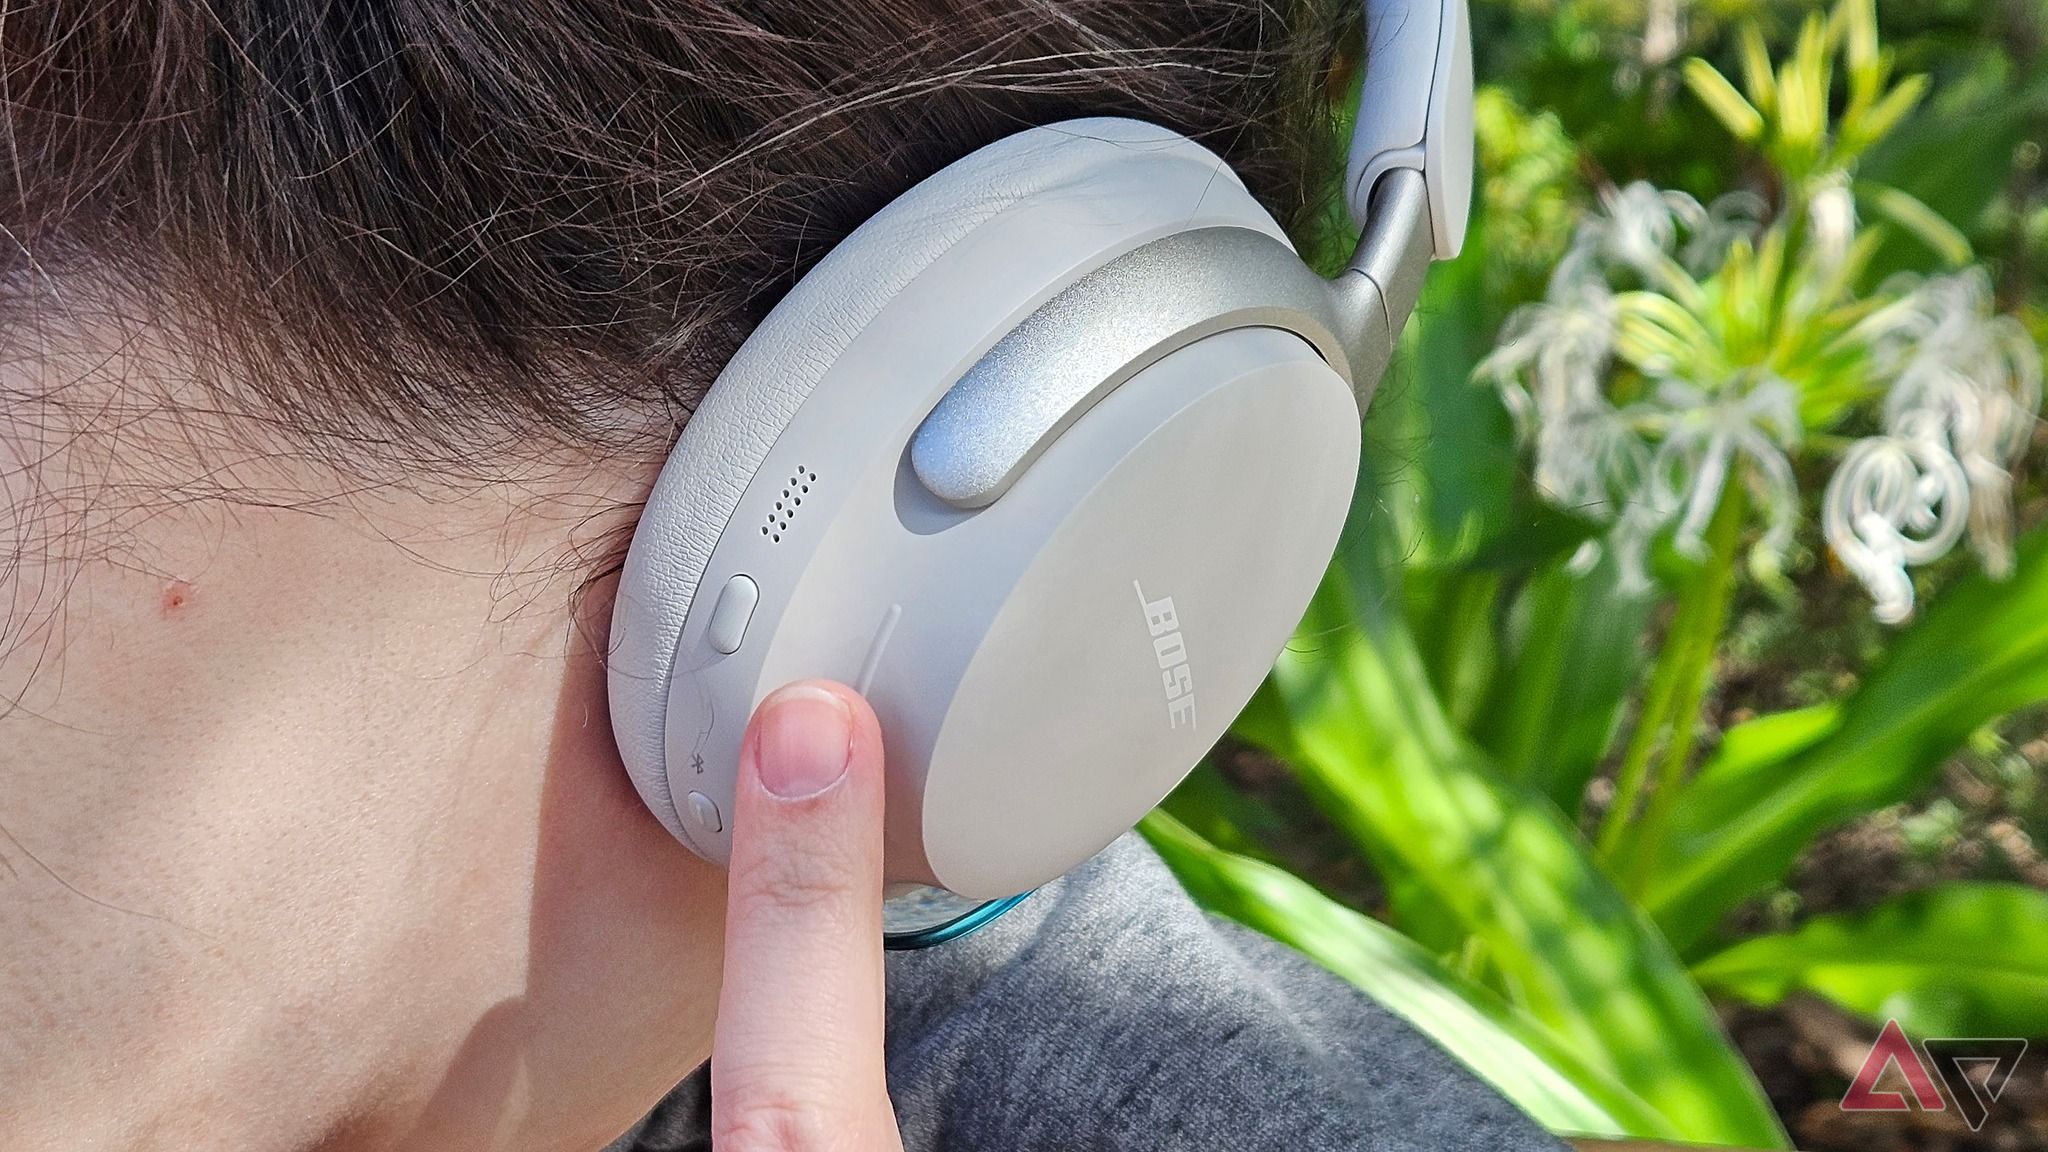 All 3 New Bose Headphones Compared/Reviewed 